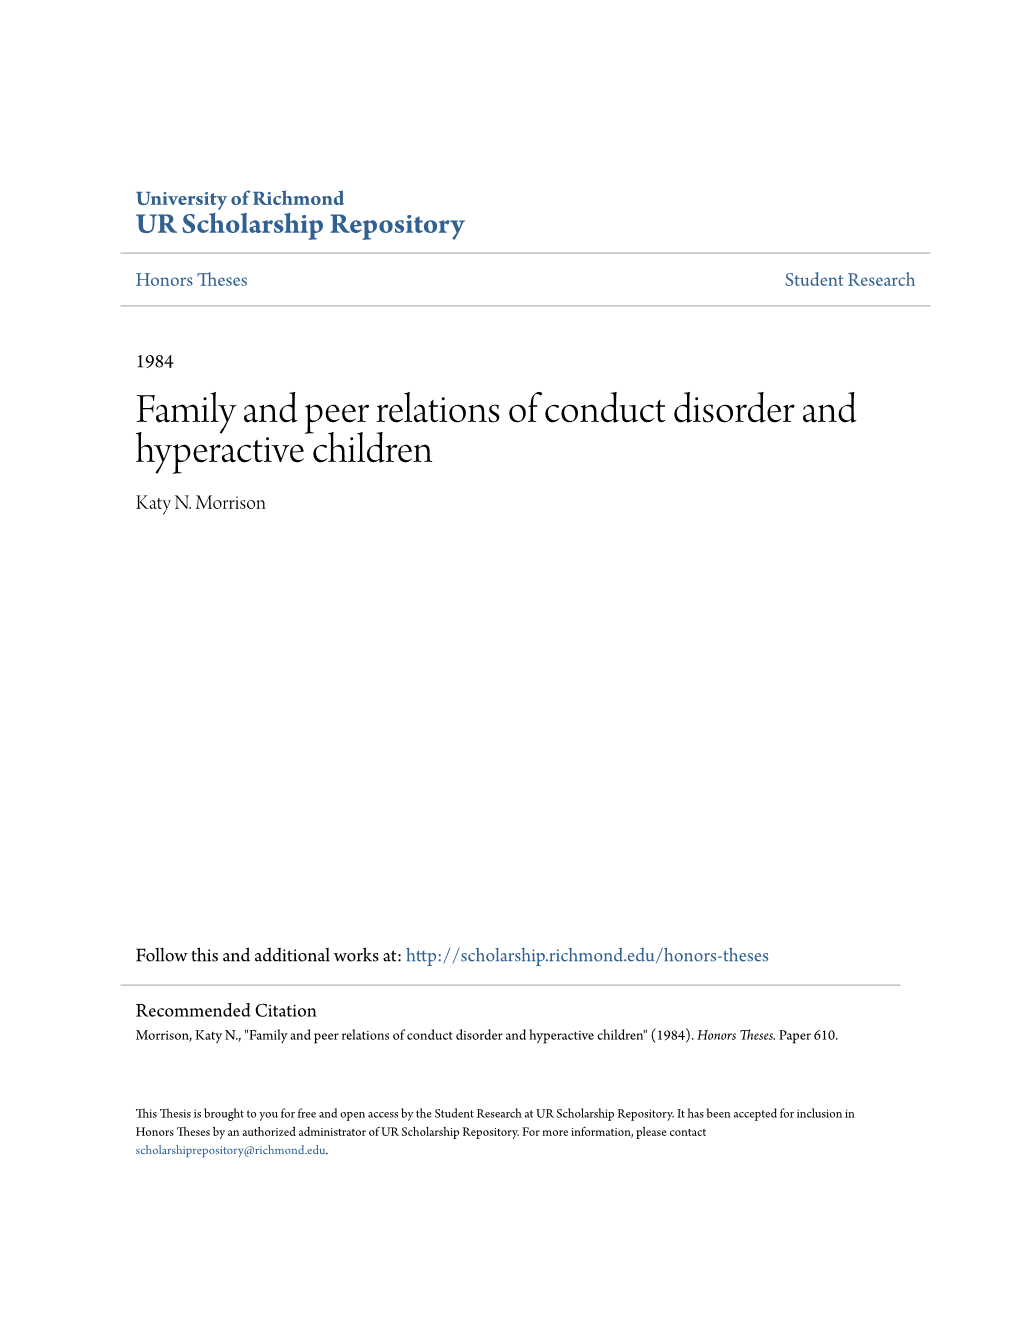 Family and Peer Relations of Conduct Disorder and Hyperactive Children Katy N